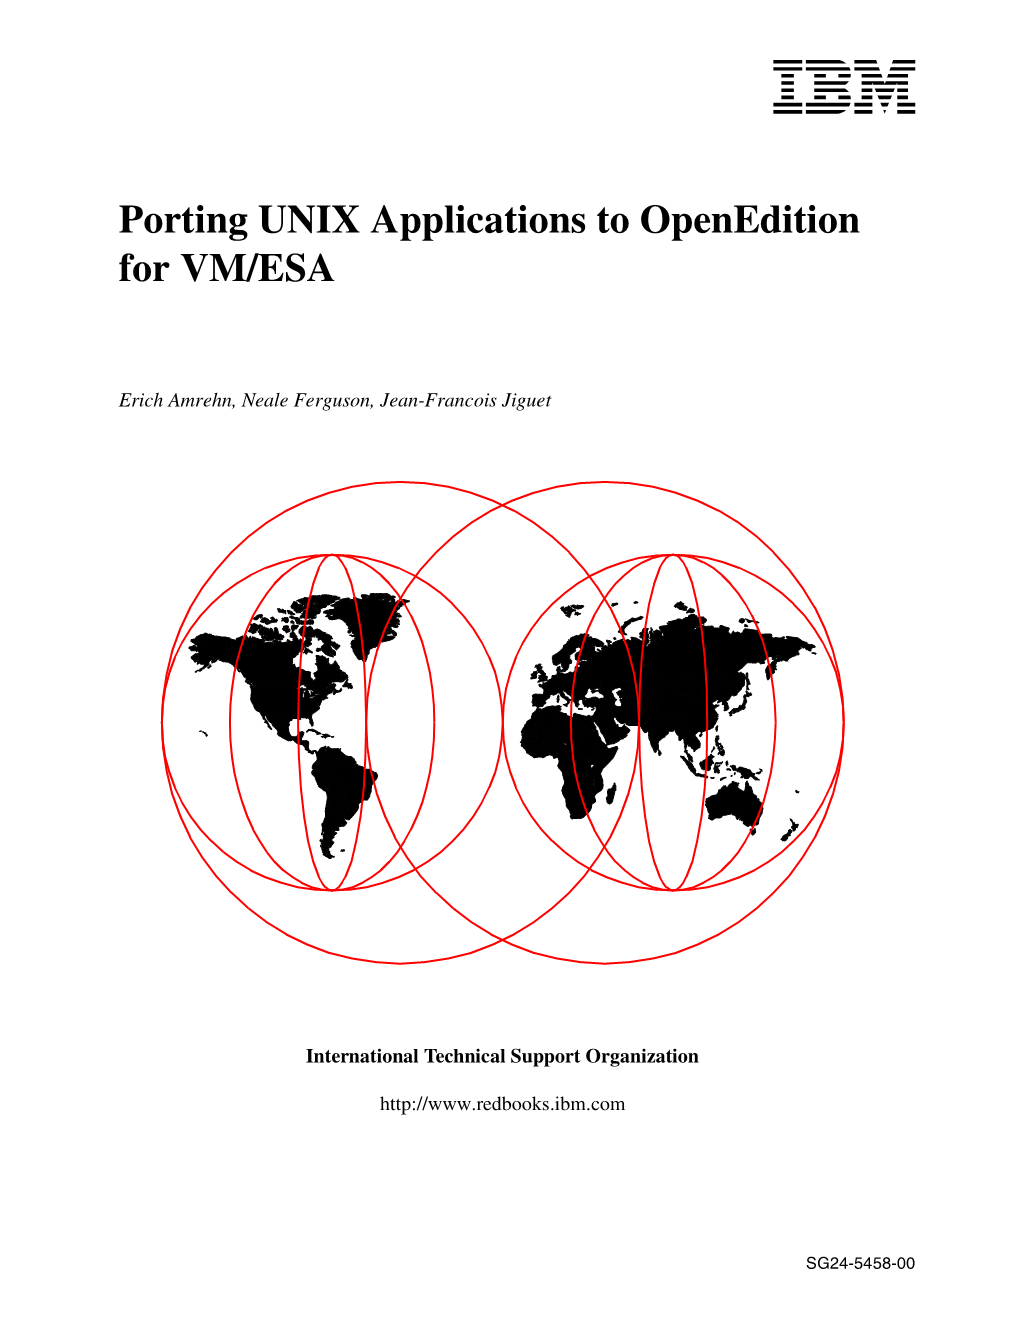 Porting UNIX Applications to Openedition for VM/ESA